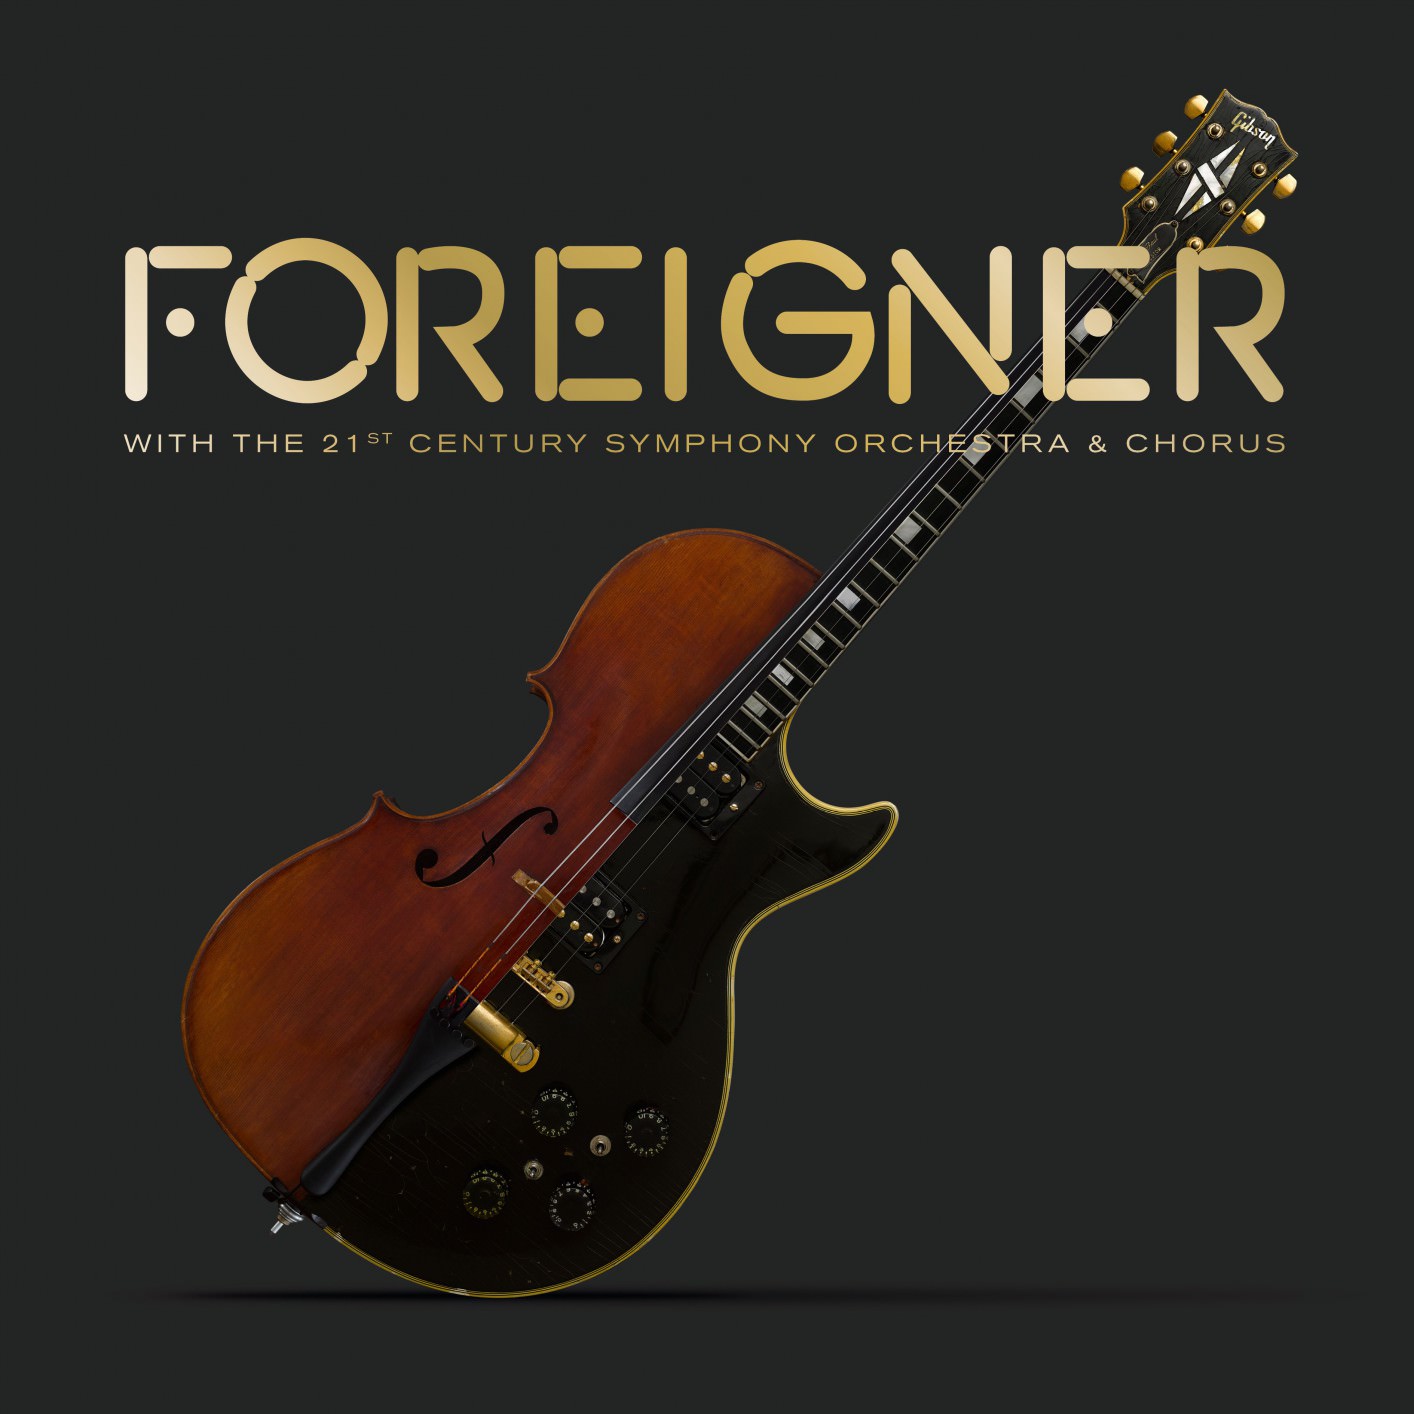 Foreigner – Foreigner with the 21st Century Symphony Orchestra & Chorus (2018) [FLAC 24bit/48kHz]